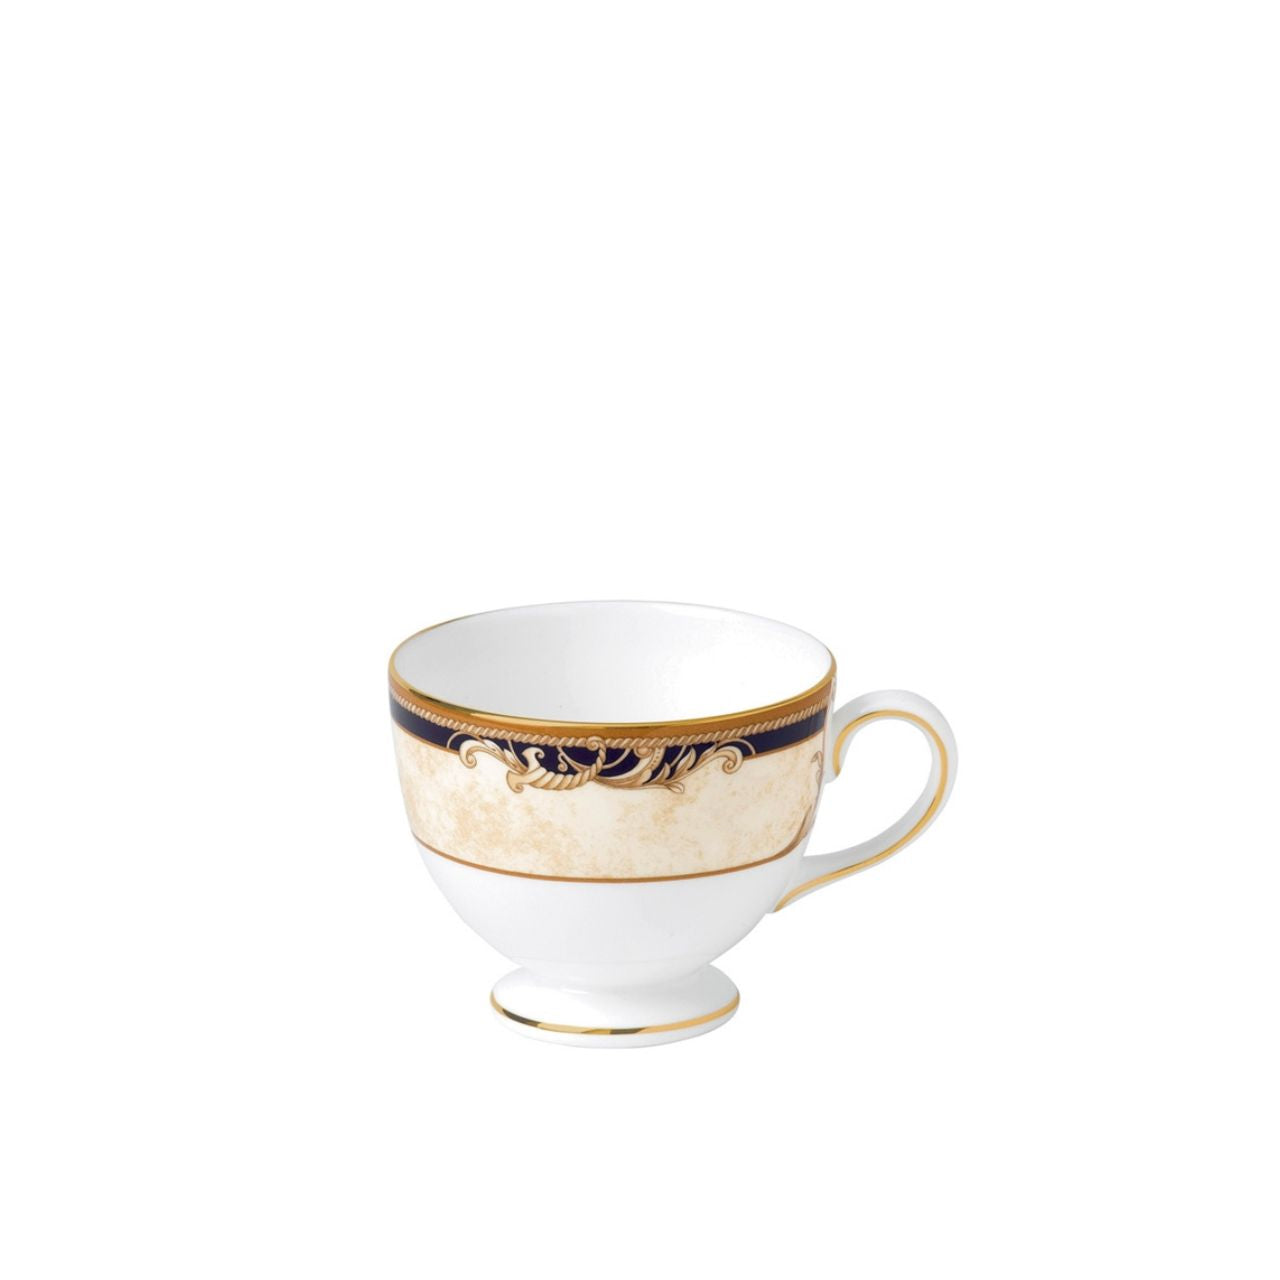 Cornucopia Teacup by Wedgwood  Saucer sold separately  Wedgwood Cornucopia is inspired by the mythical 'Horn of Plenty,' and is characterized by designs featuring legendary creatures like unicorns and satyrs.